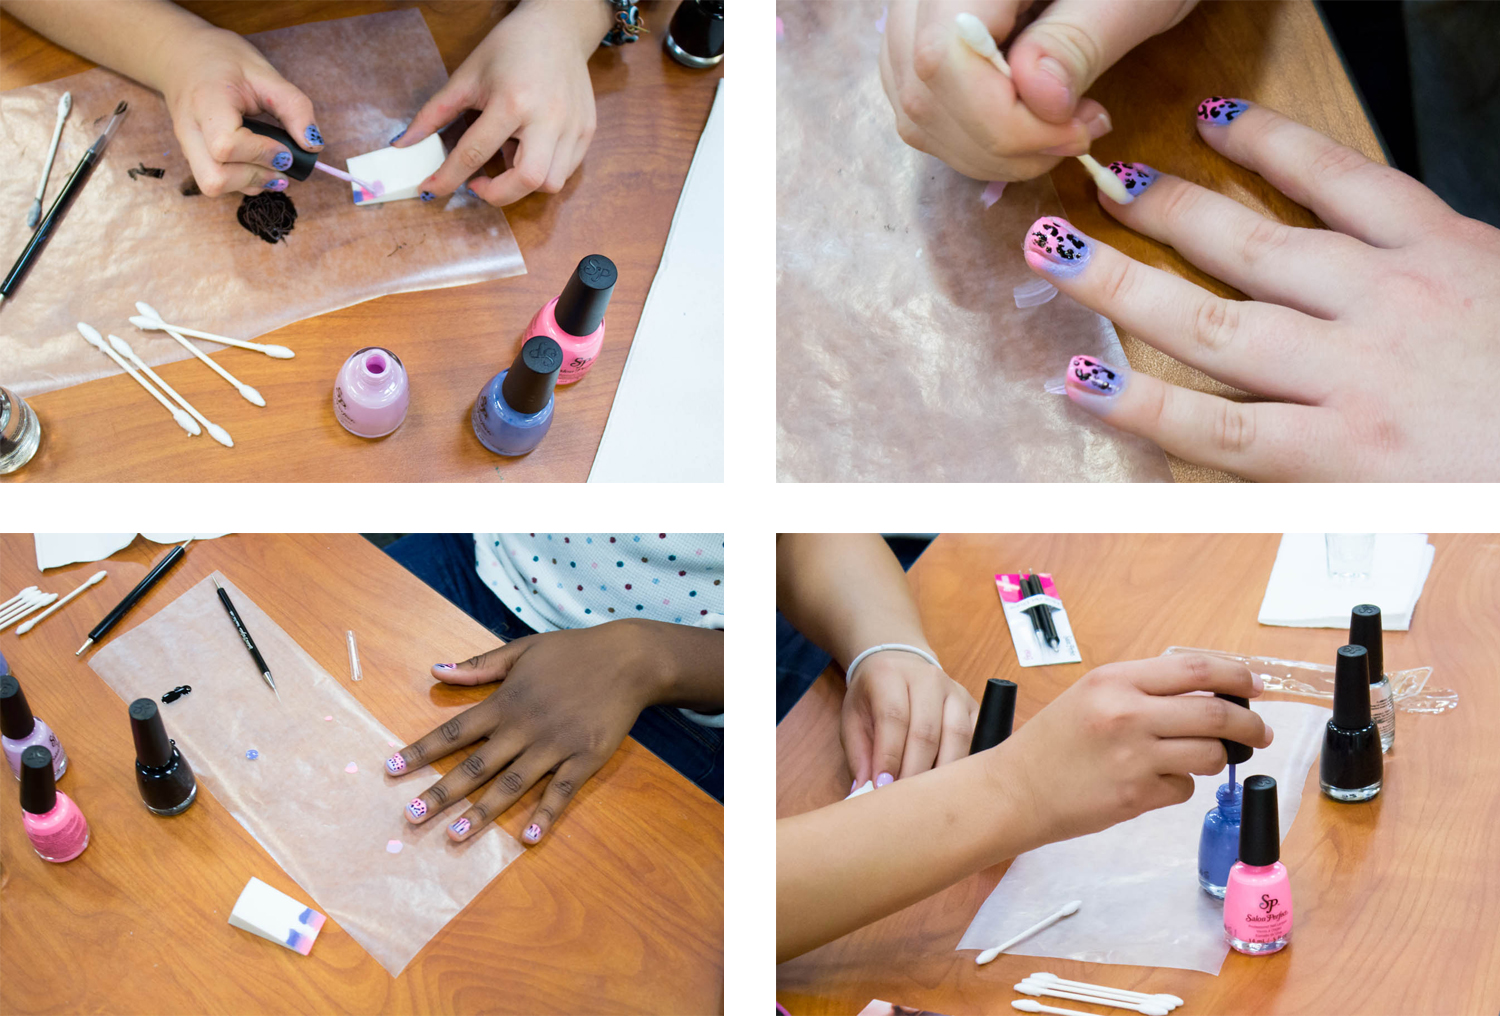 7. The Nail Art School - wide 10